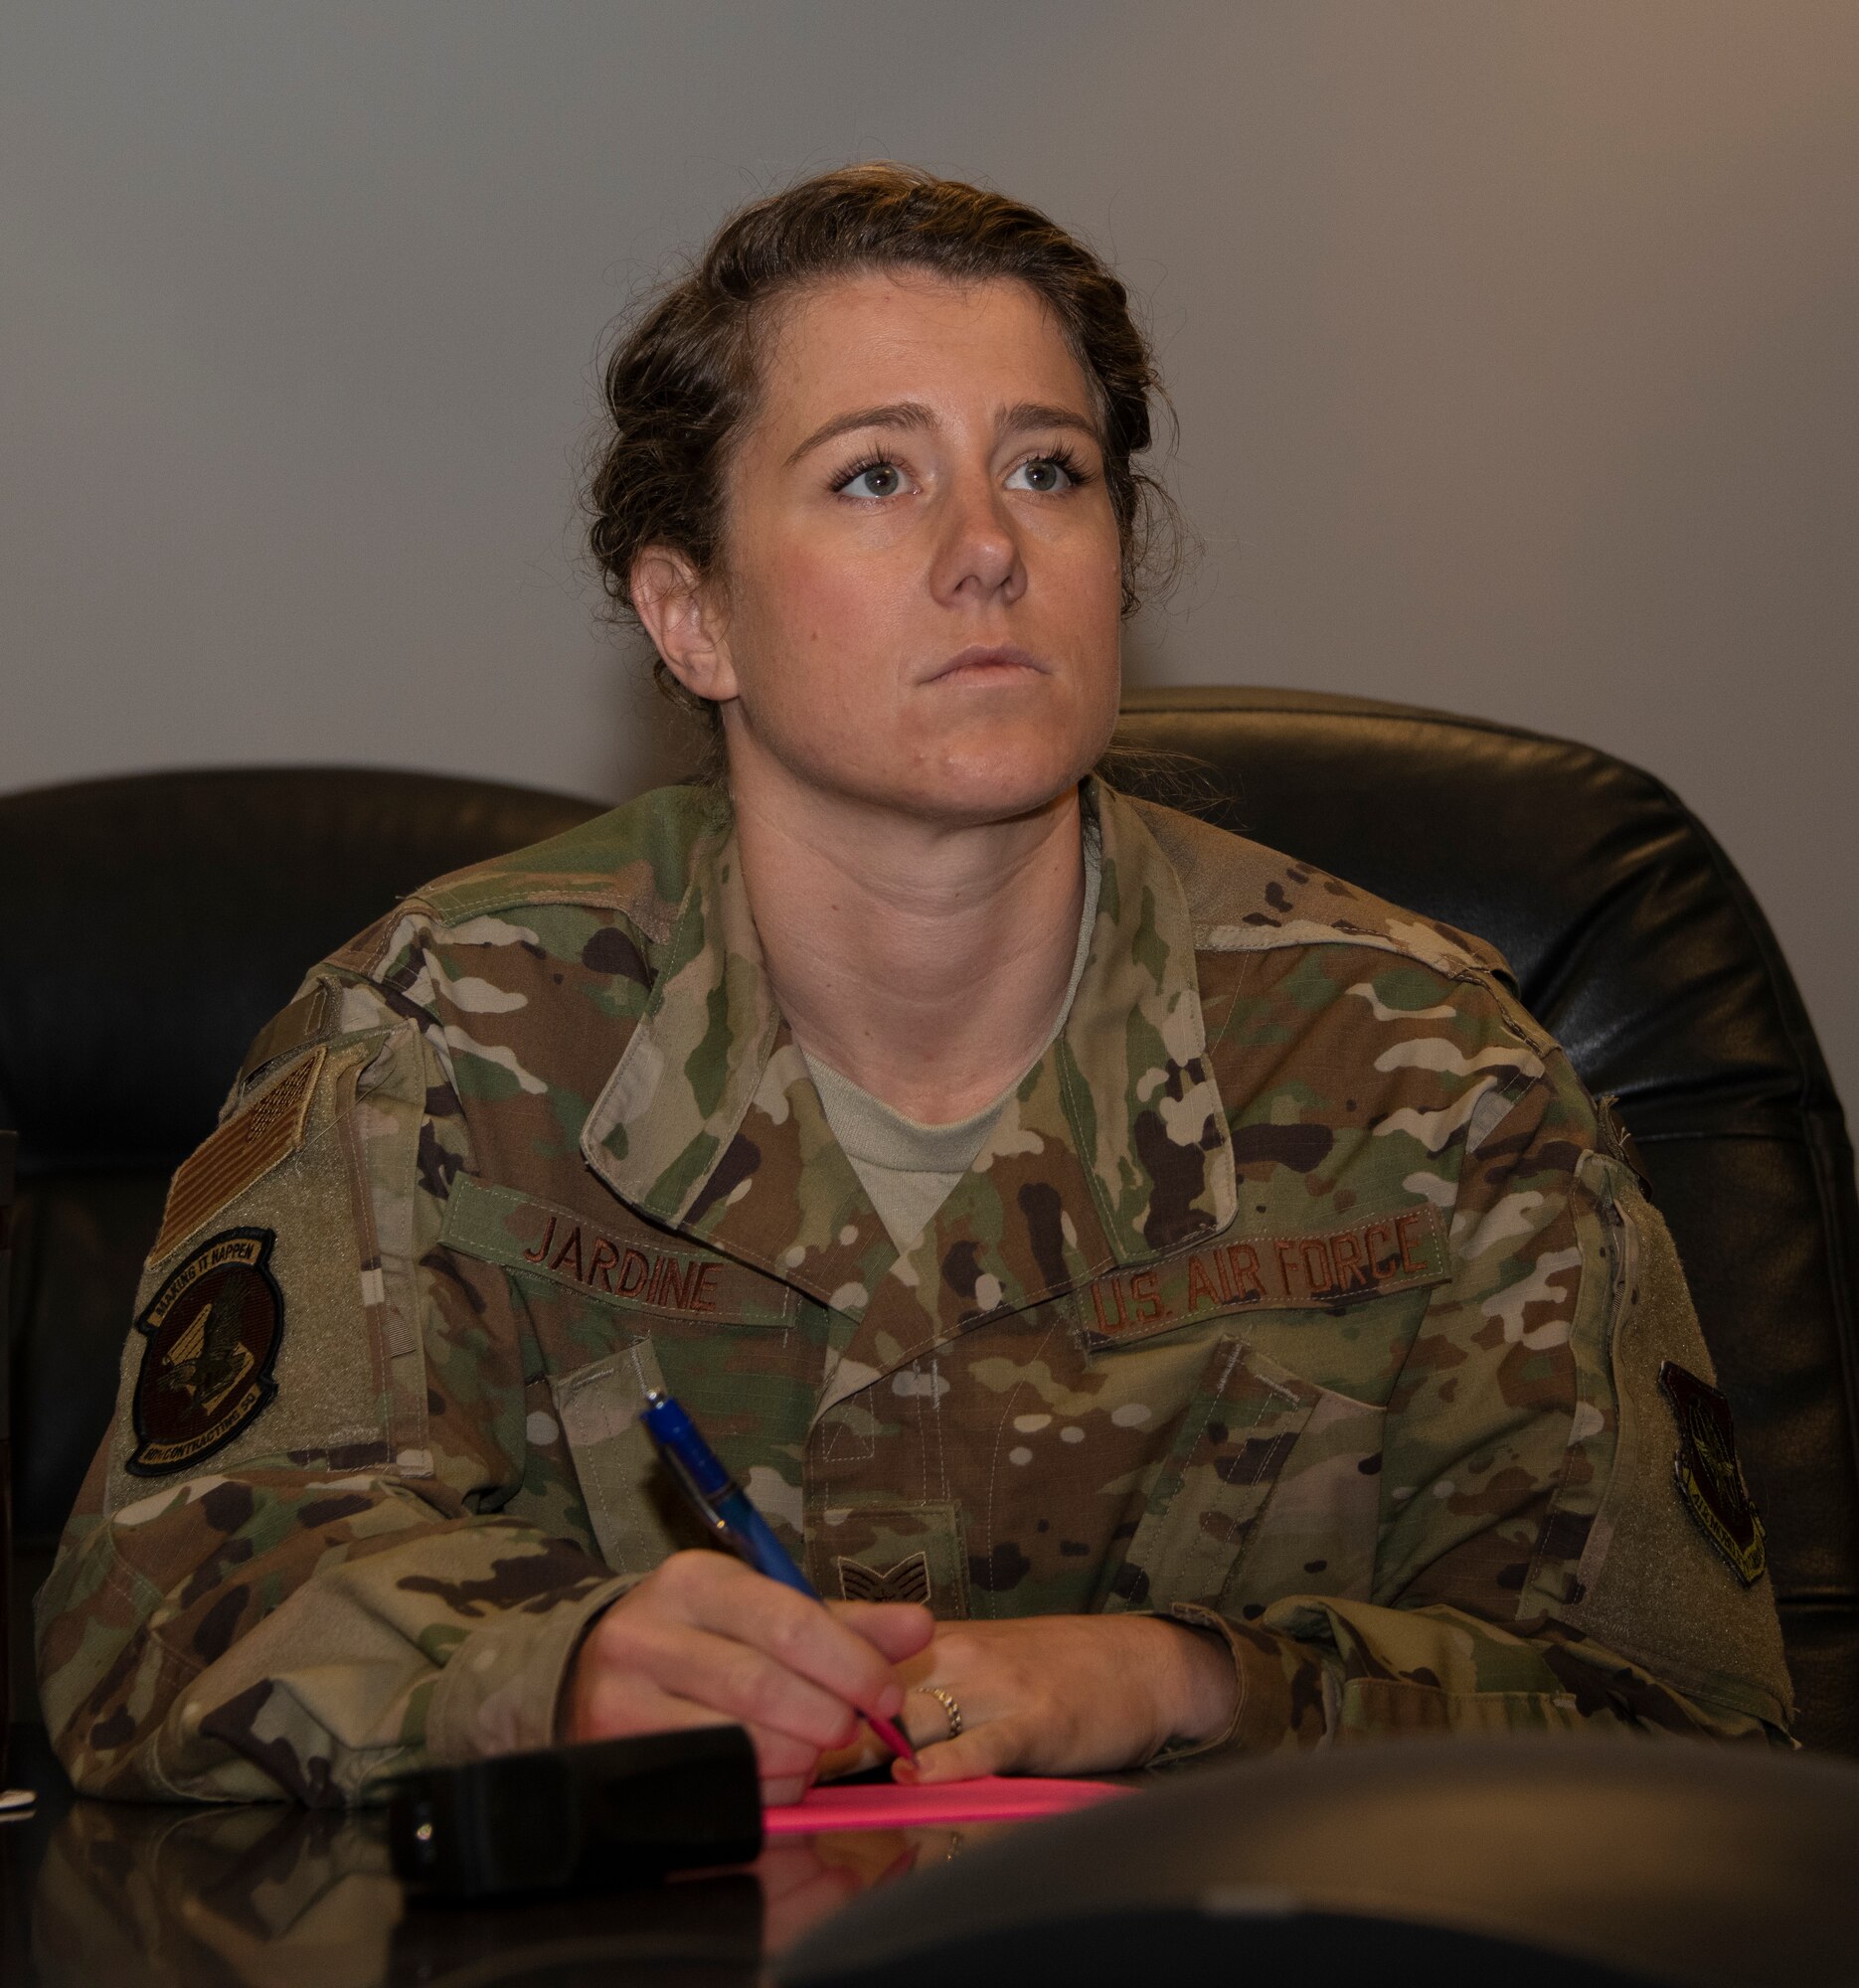 U.S. Air Force Staff Sgt. Amanda Jardine, 60th Contracting Squadron contracting officer, listens to a presentation May 20, 2020, during a commercial solutions opening event at Travis Air Force Base, California. The event, the first of its kind in Travis AFB history, was organized by the Travis Phoenix Spark Innovation Cell and the 60th CONS. (U.S. Air Force photo by Tech. Sgt. James Hodgman)